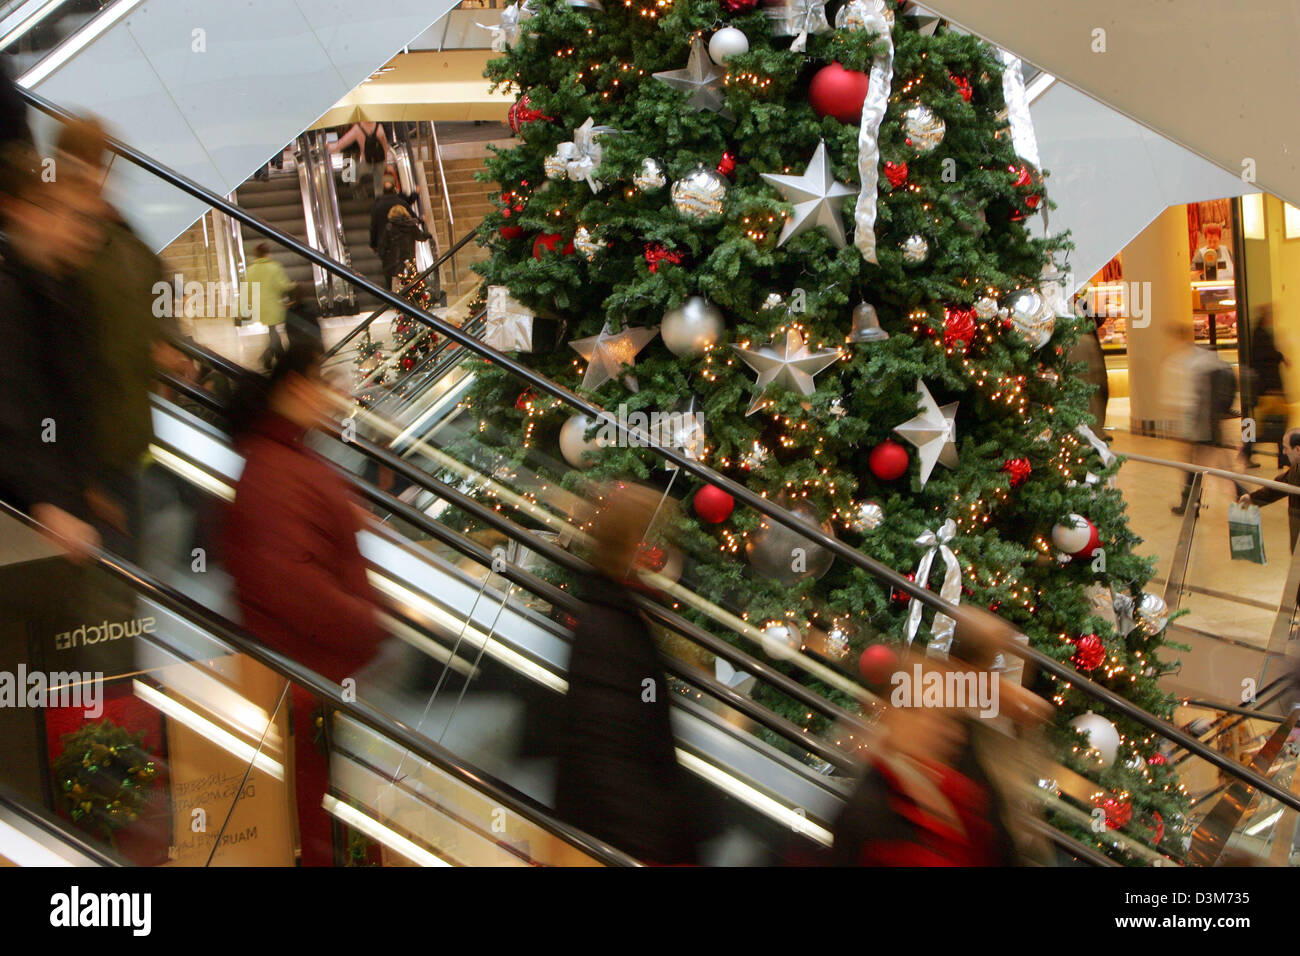 Tysons Galleria Shopping Mall in McLean, Virginia Editorial Photography -  Image of tree, decoration: 267043512